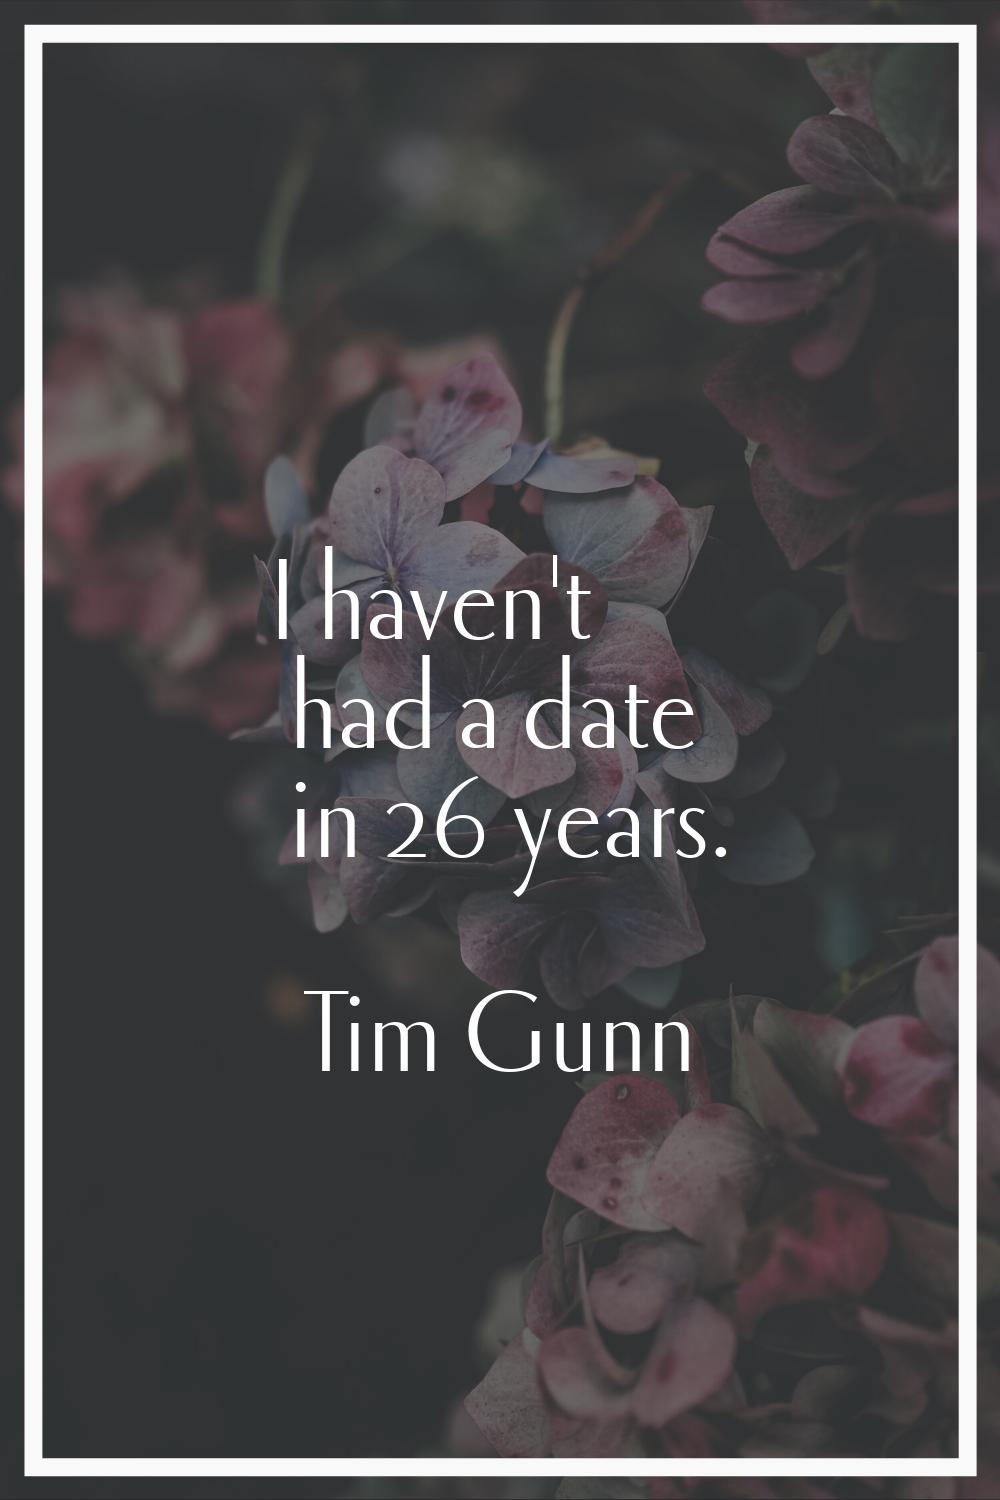 I haven't had a date in 26 years.